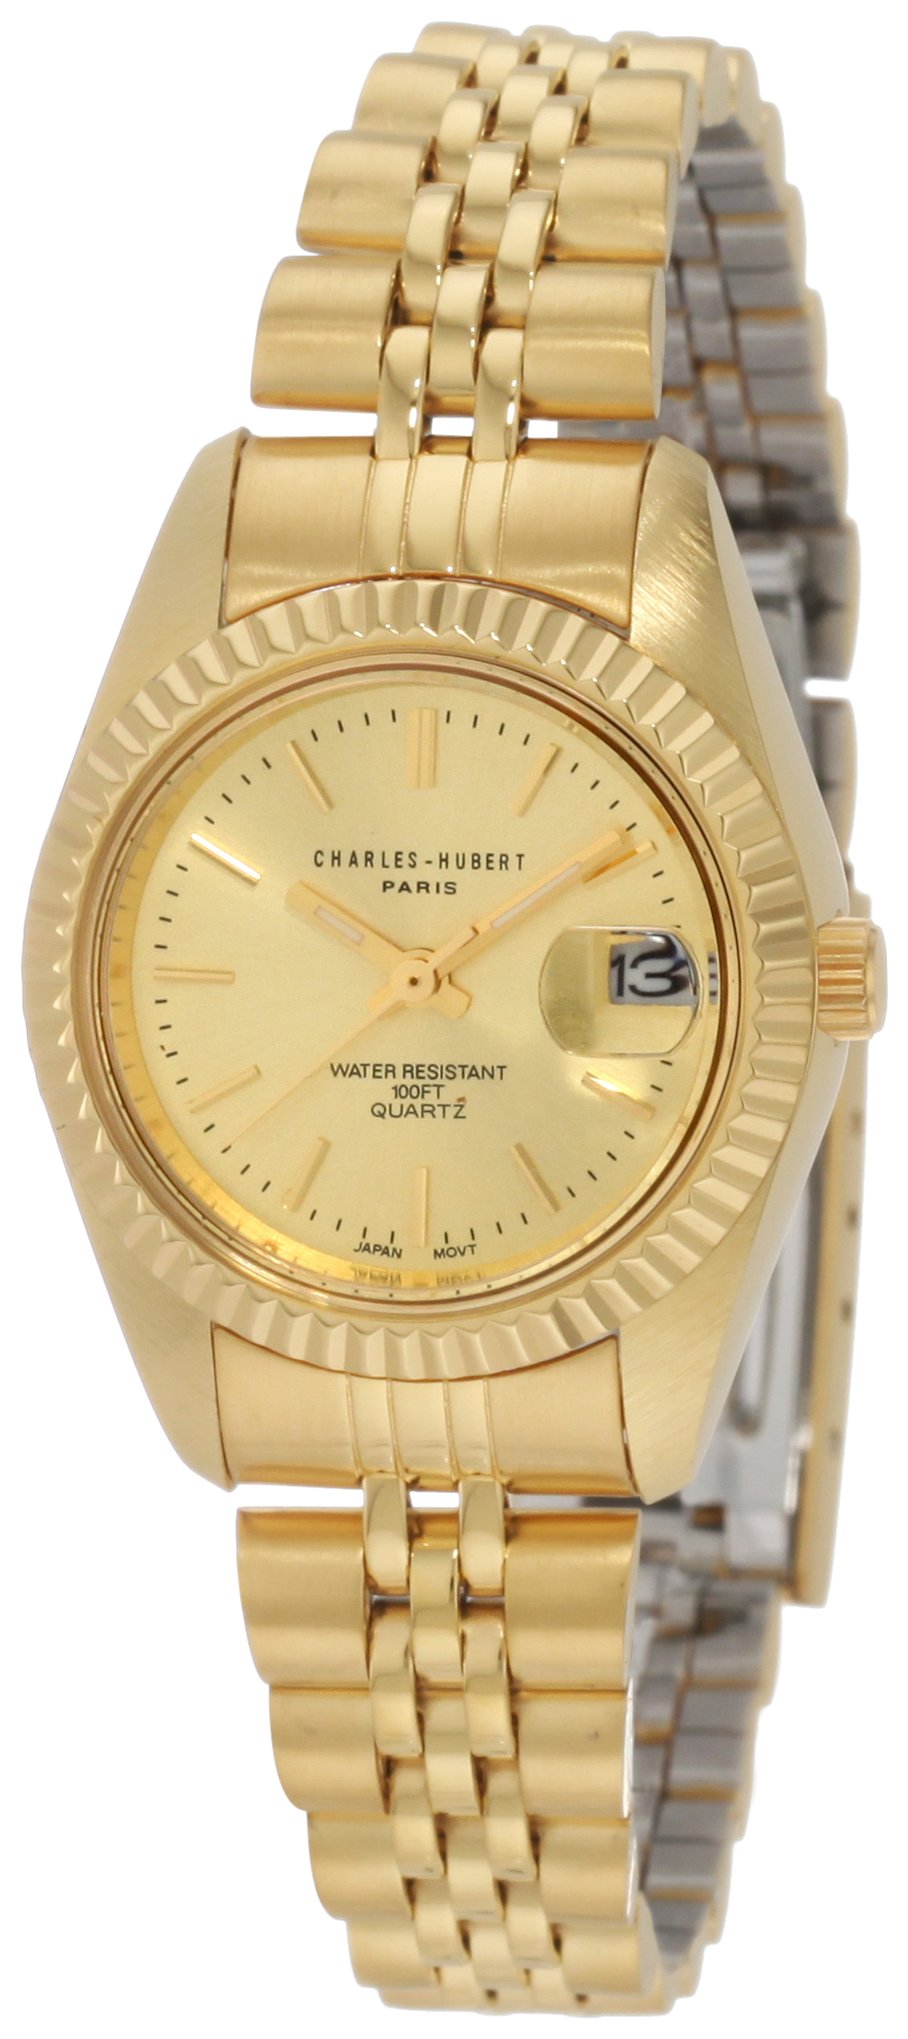 Charles-Hubert, Paris Women's 6444 Classic Collection Gold-Plated Stainless Steel Watch